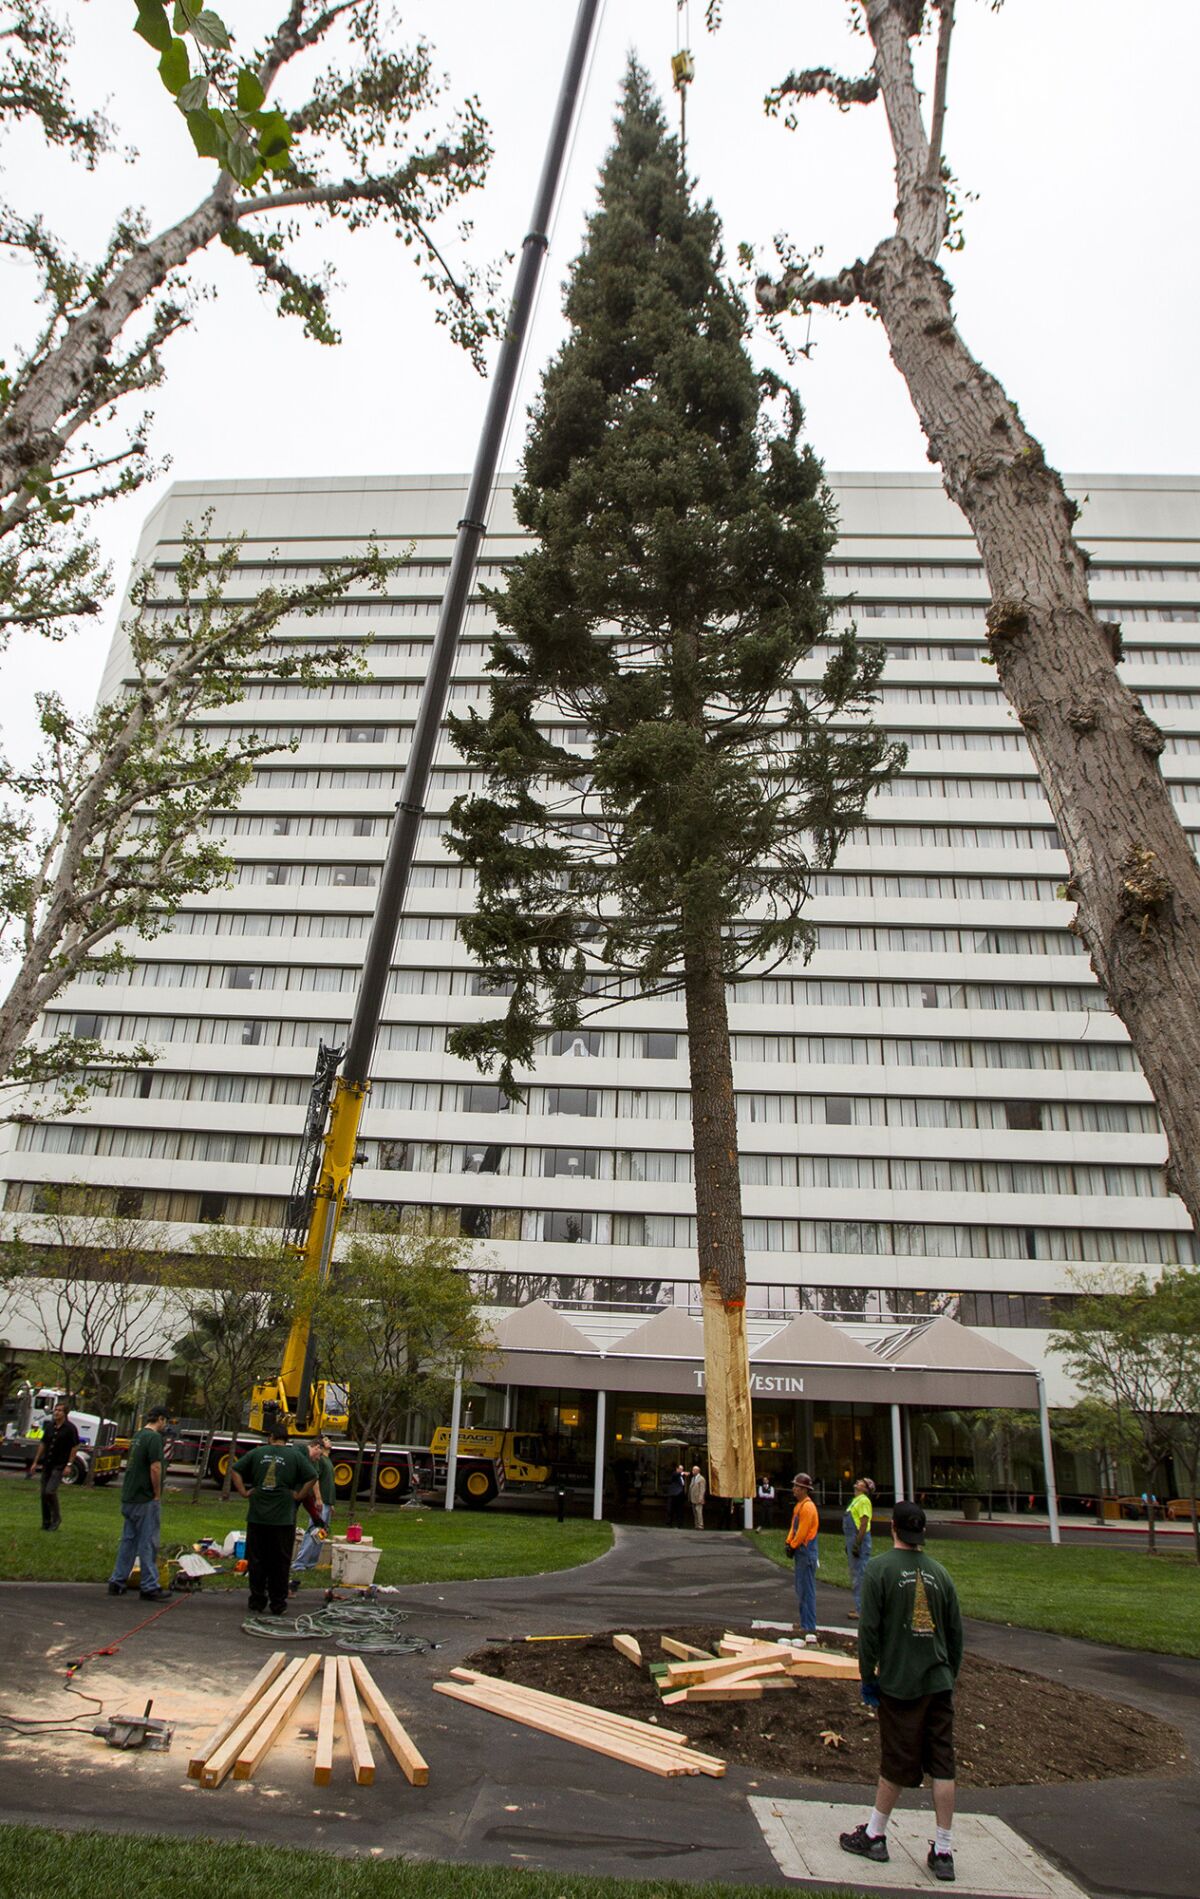 The South Coast Plaza tree is lowered into place near the Westin Hotel on Tuesday.